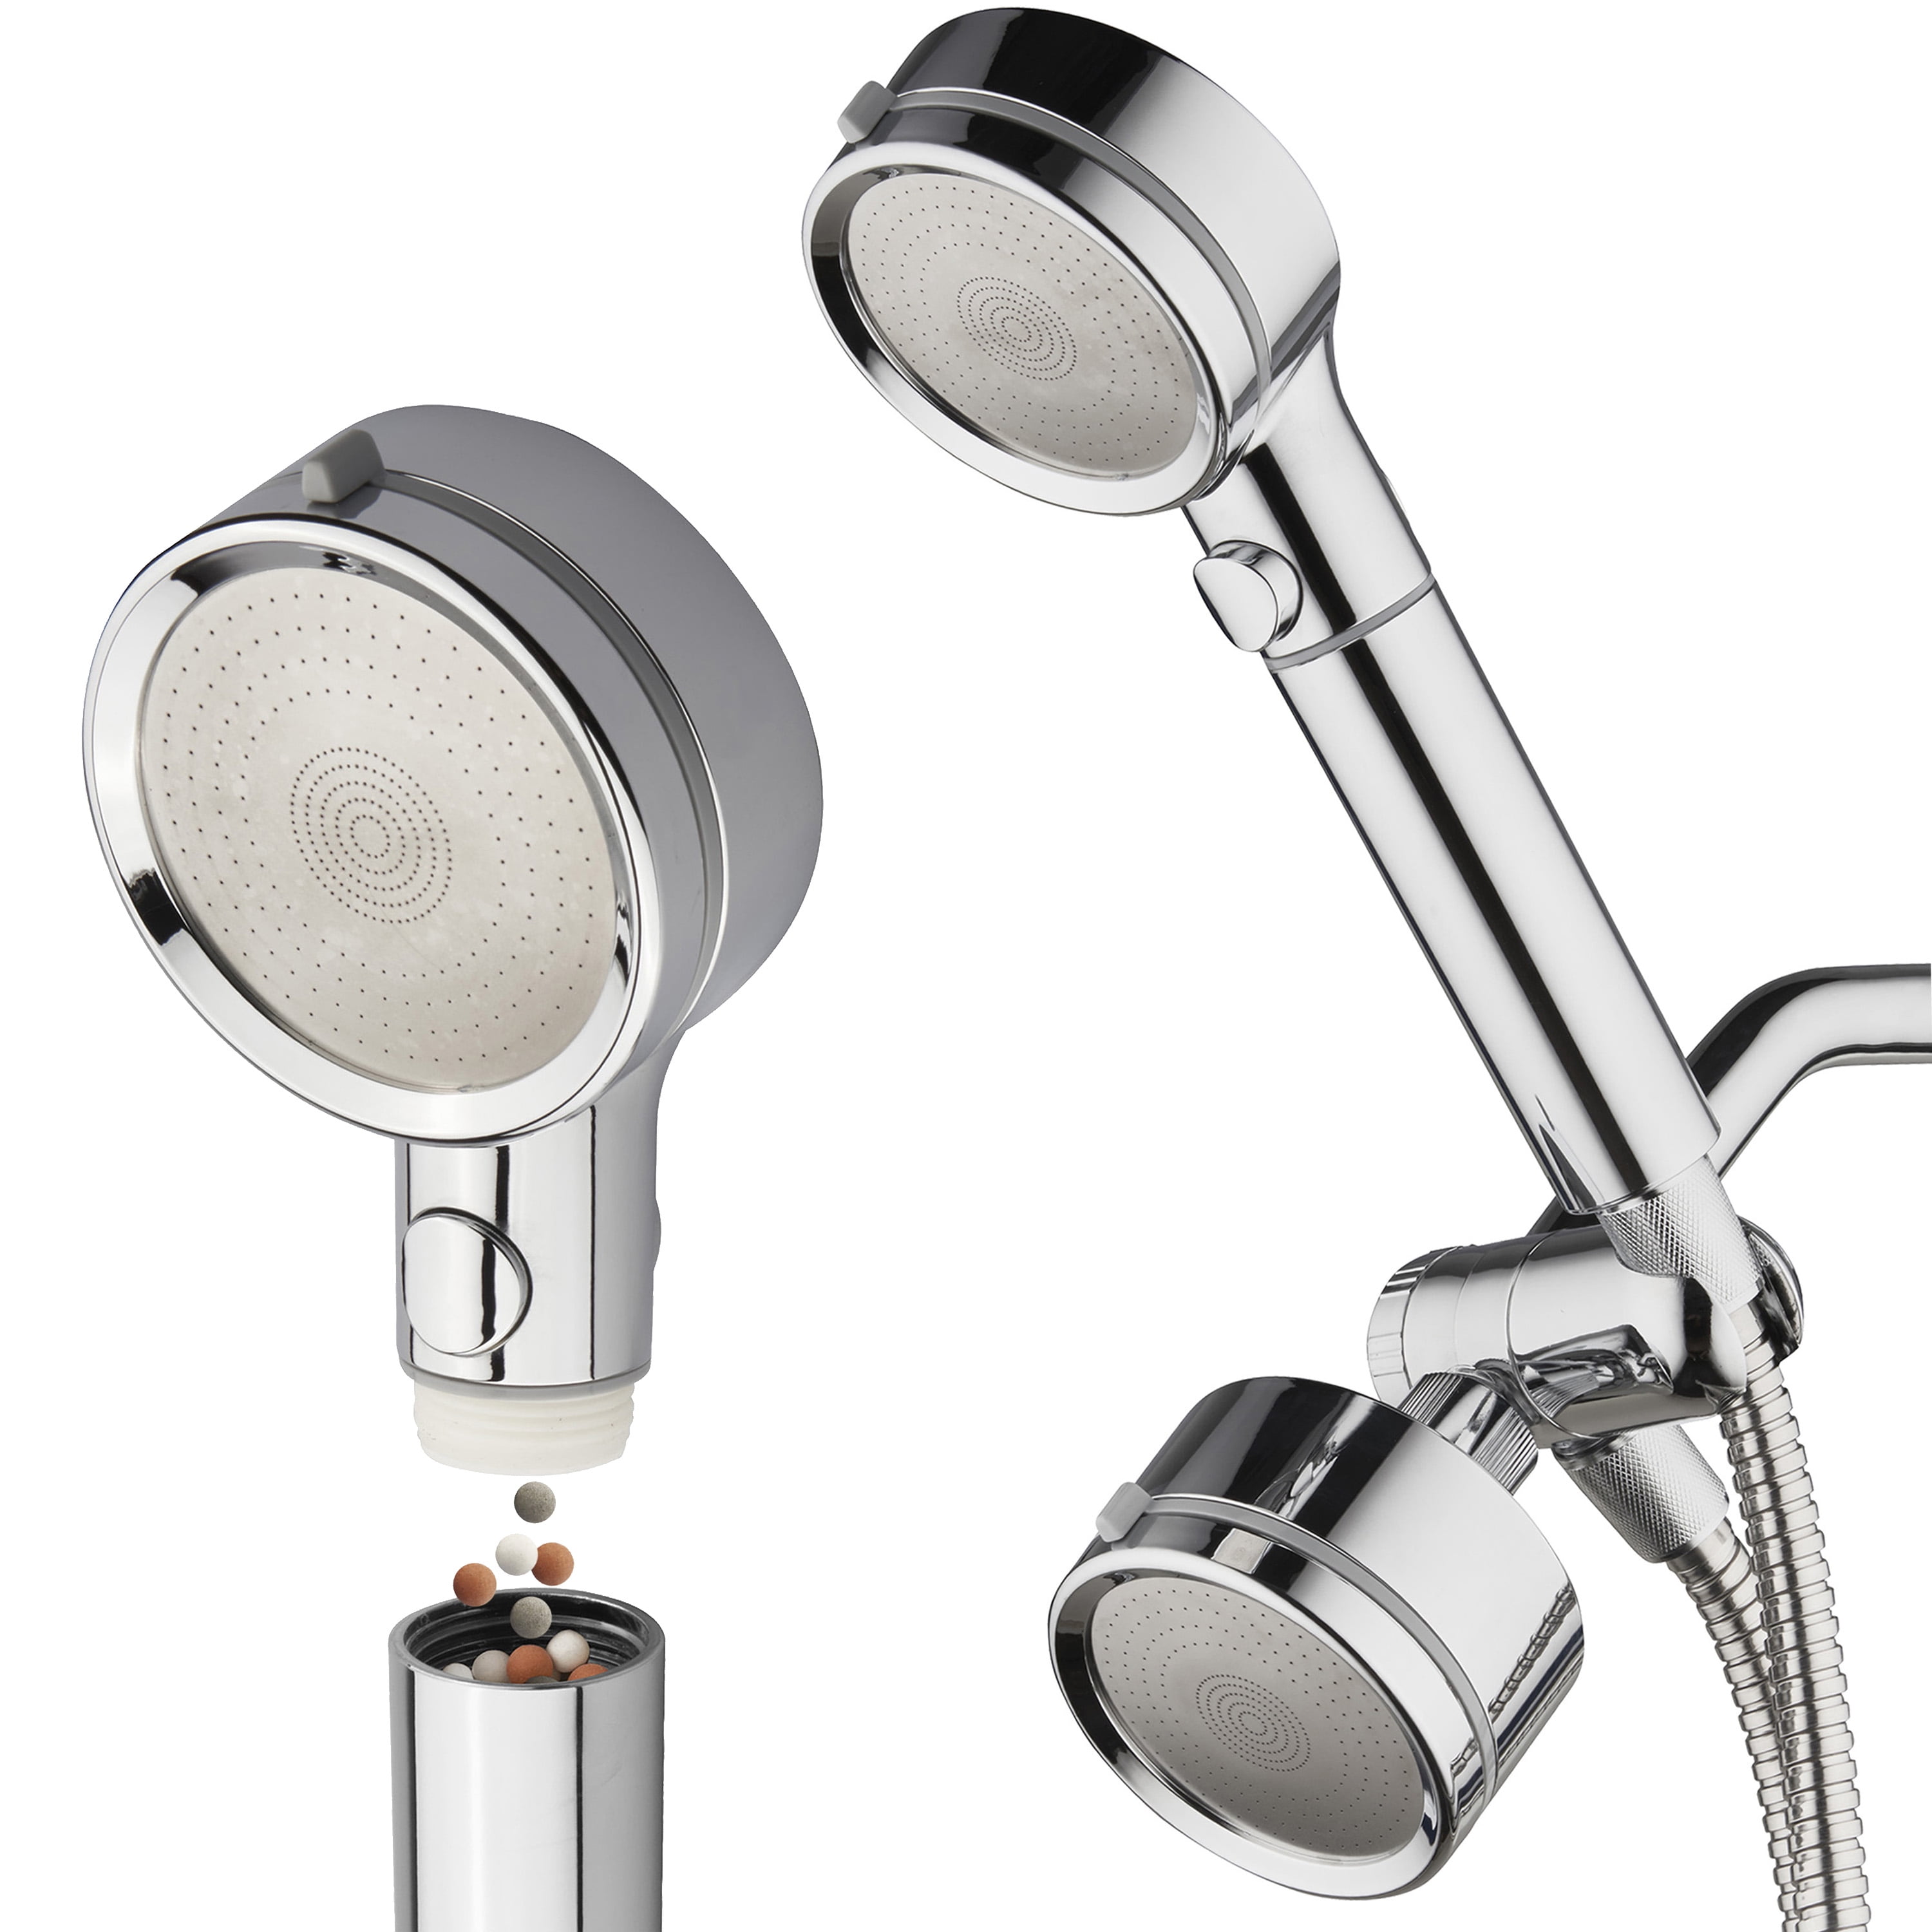 LaserJet Hand Shower Head 2 Water Filters & Pause Switch Chrome Finish 